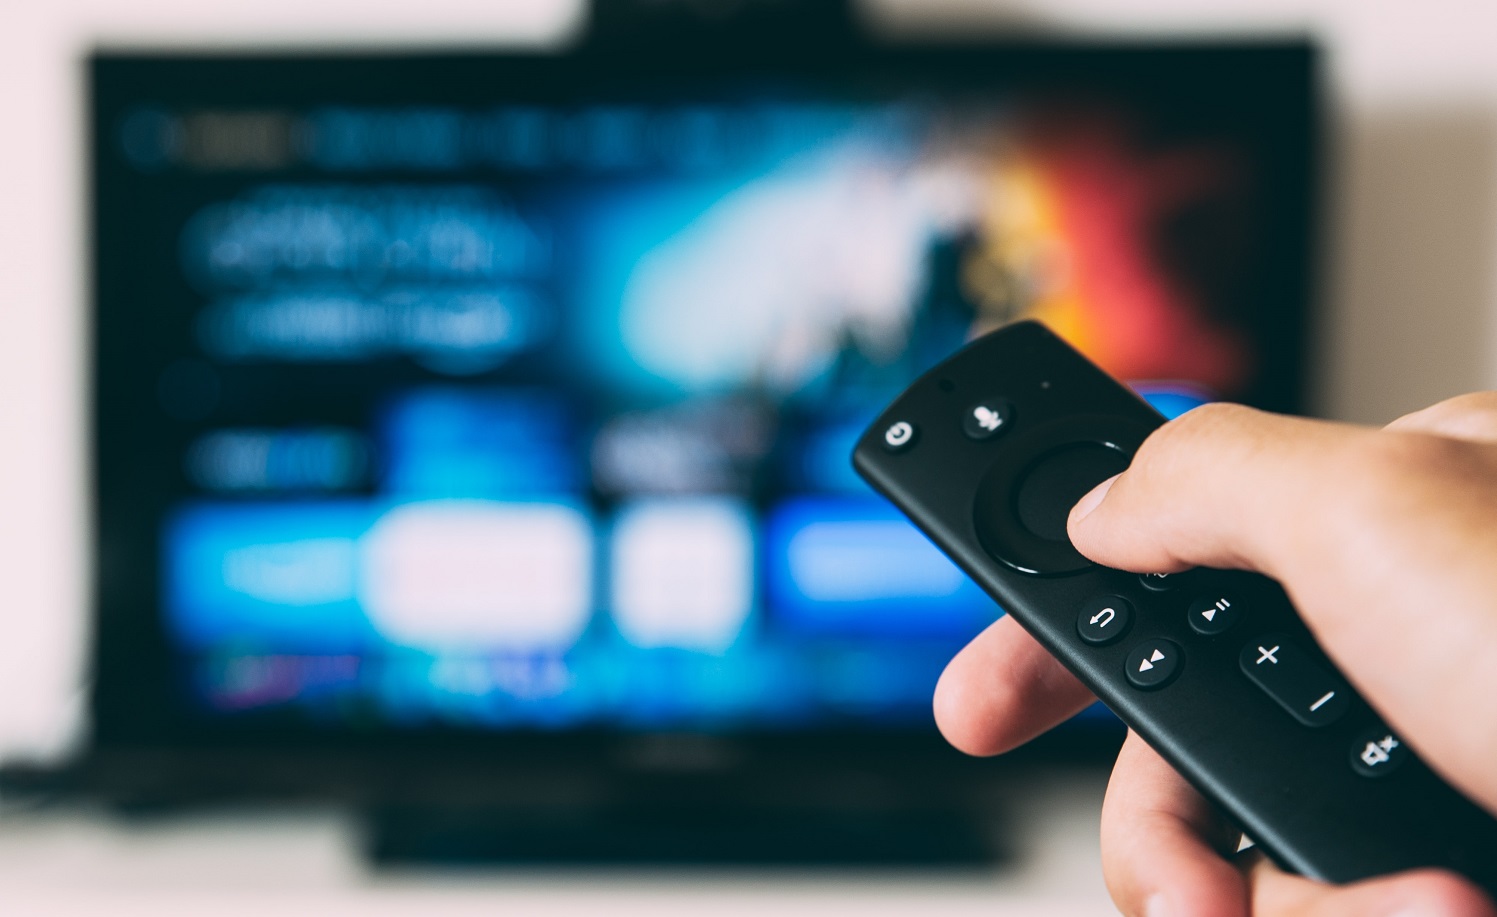 Vast Majority of Brands Believe that Connected TV Advertising Will Be Bigger than Mobile Advertising